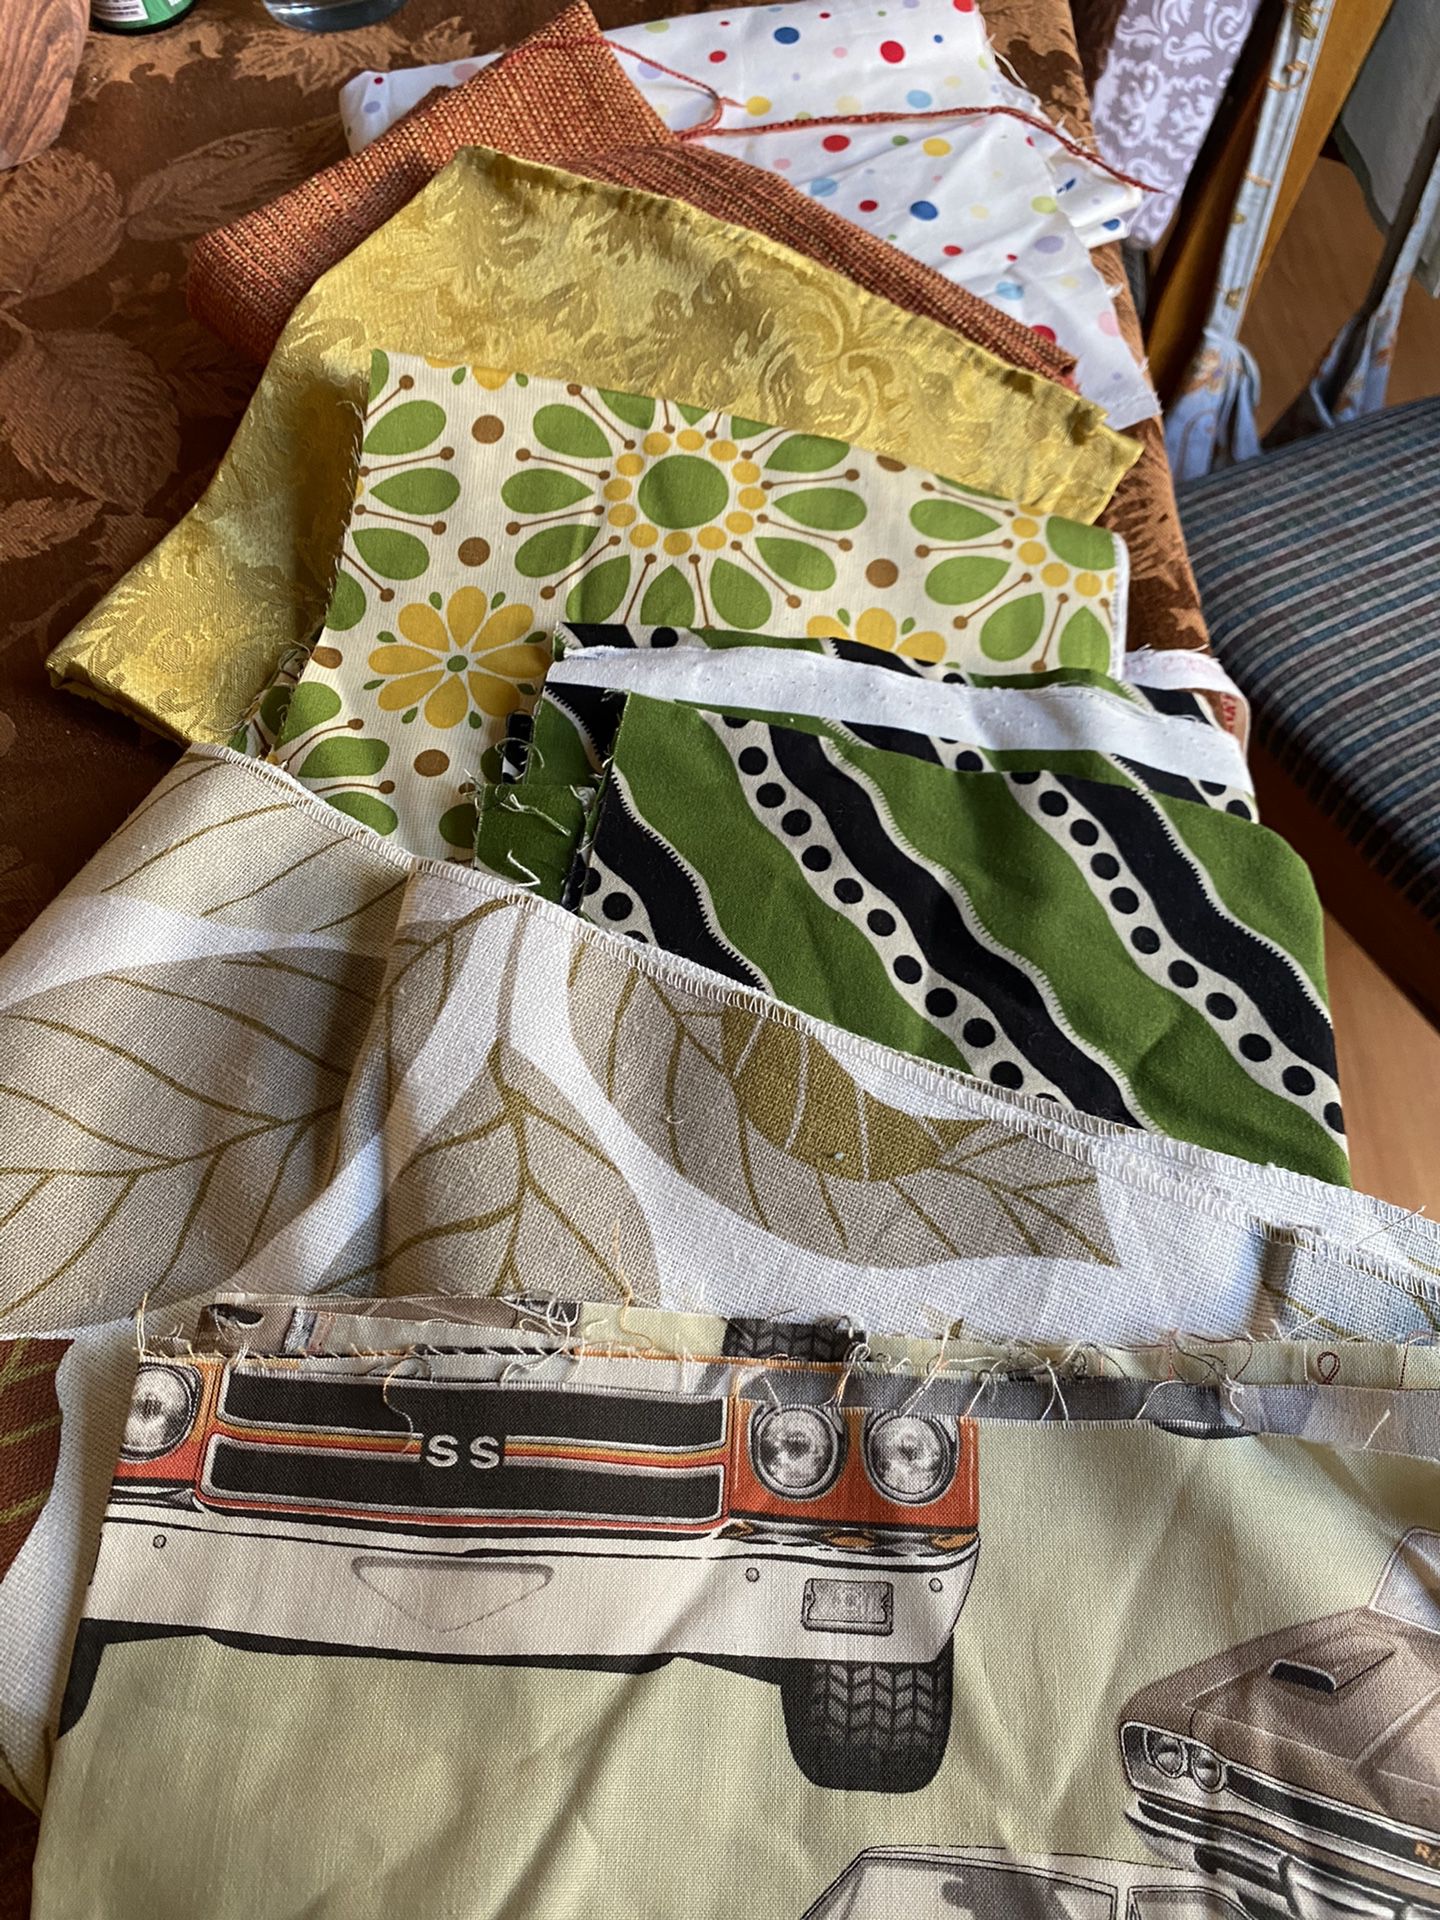 Lot of Fabric, Ribbons, Patterns